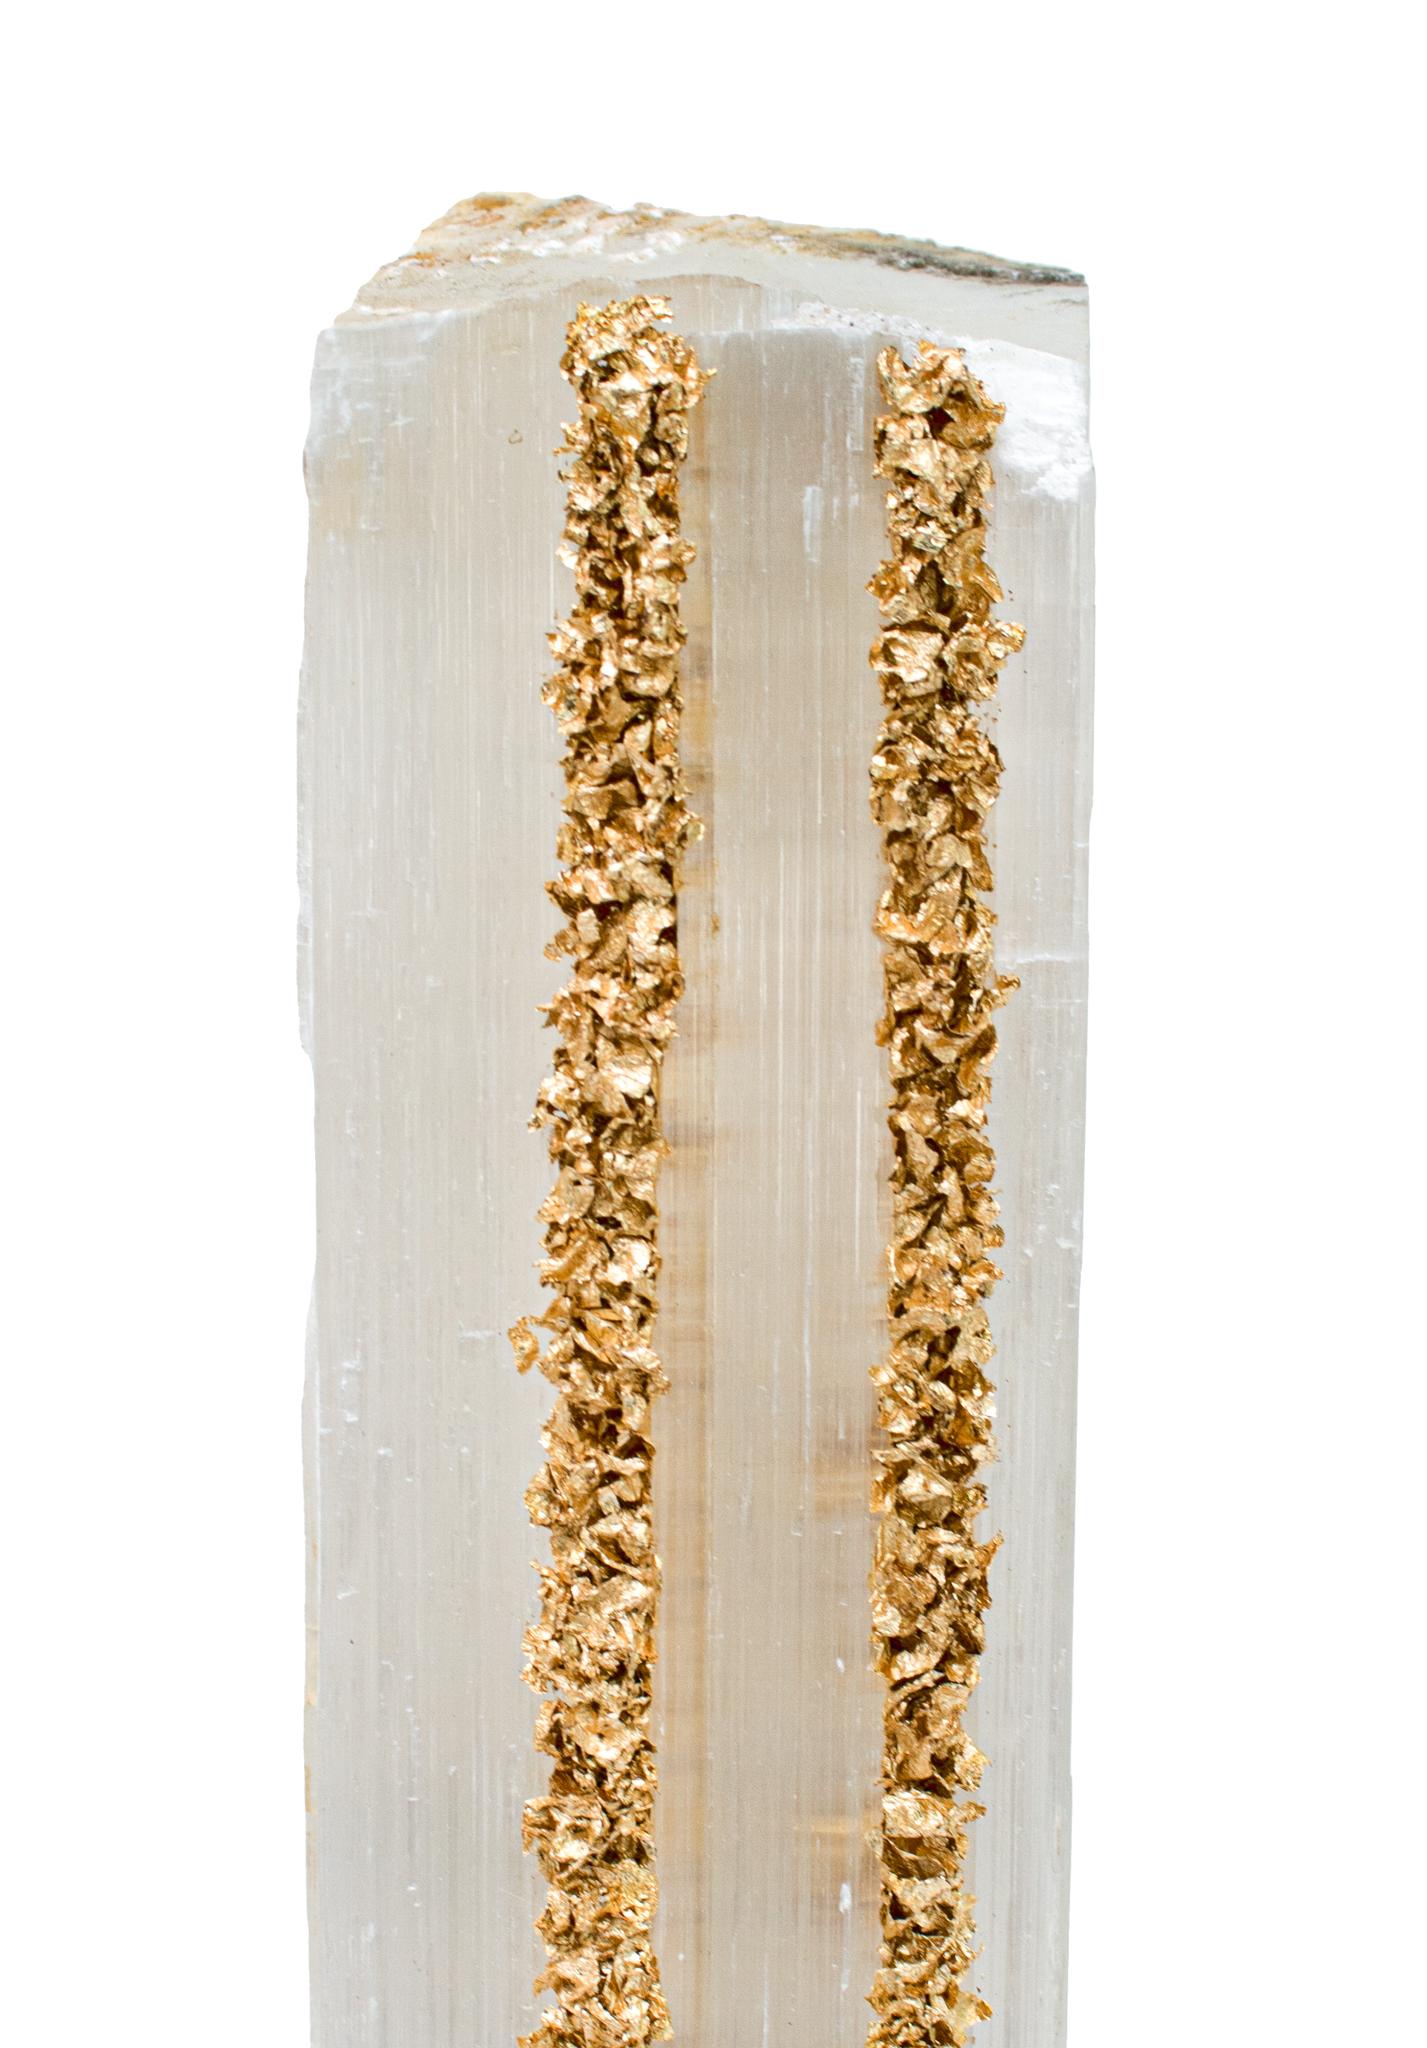 Ruler Selenite with gold leaf on a Lucite base. Selenite logs are single, prismatic selenite crystals from Morocco that were formed in extensive beds by the evaporation of ocean brine. This mineral is characterized by a silky, pearly luster called